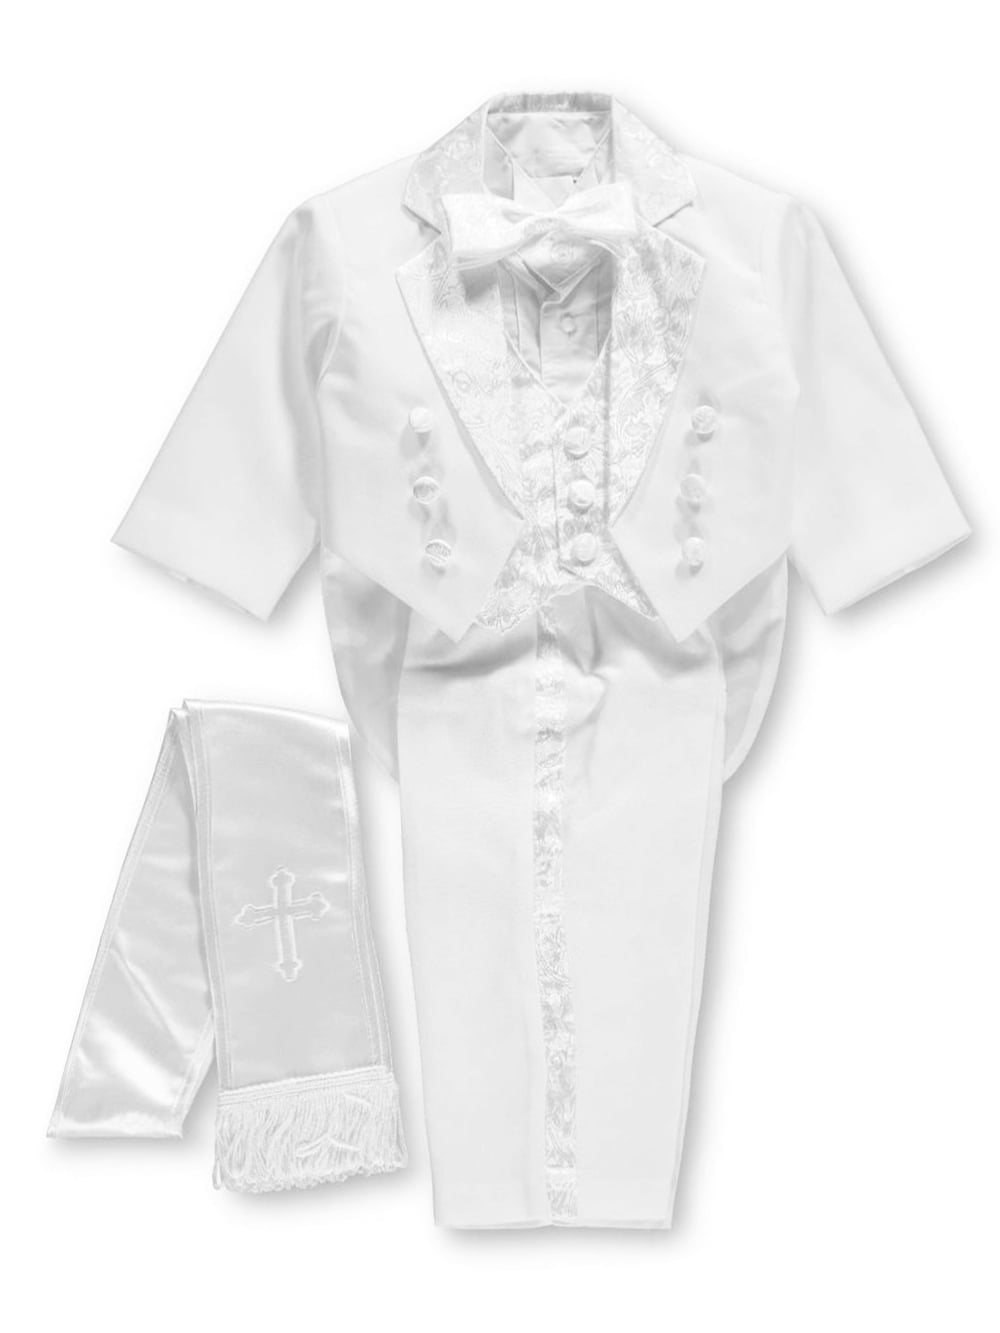 Baby Boy & Toddler Christen Baptism vest shorts Suit Gown Outfits sz XS-4T white 